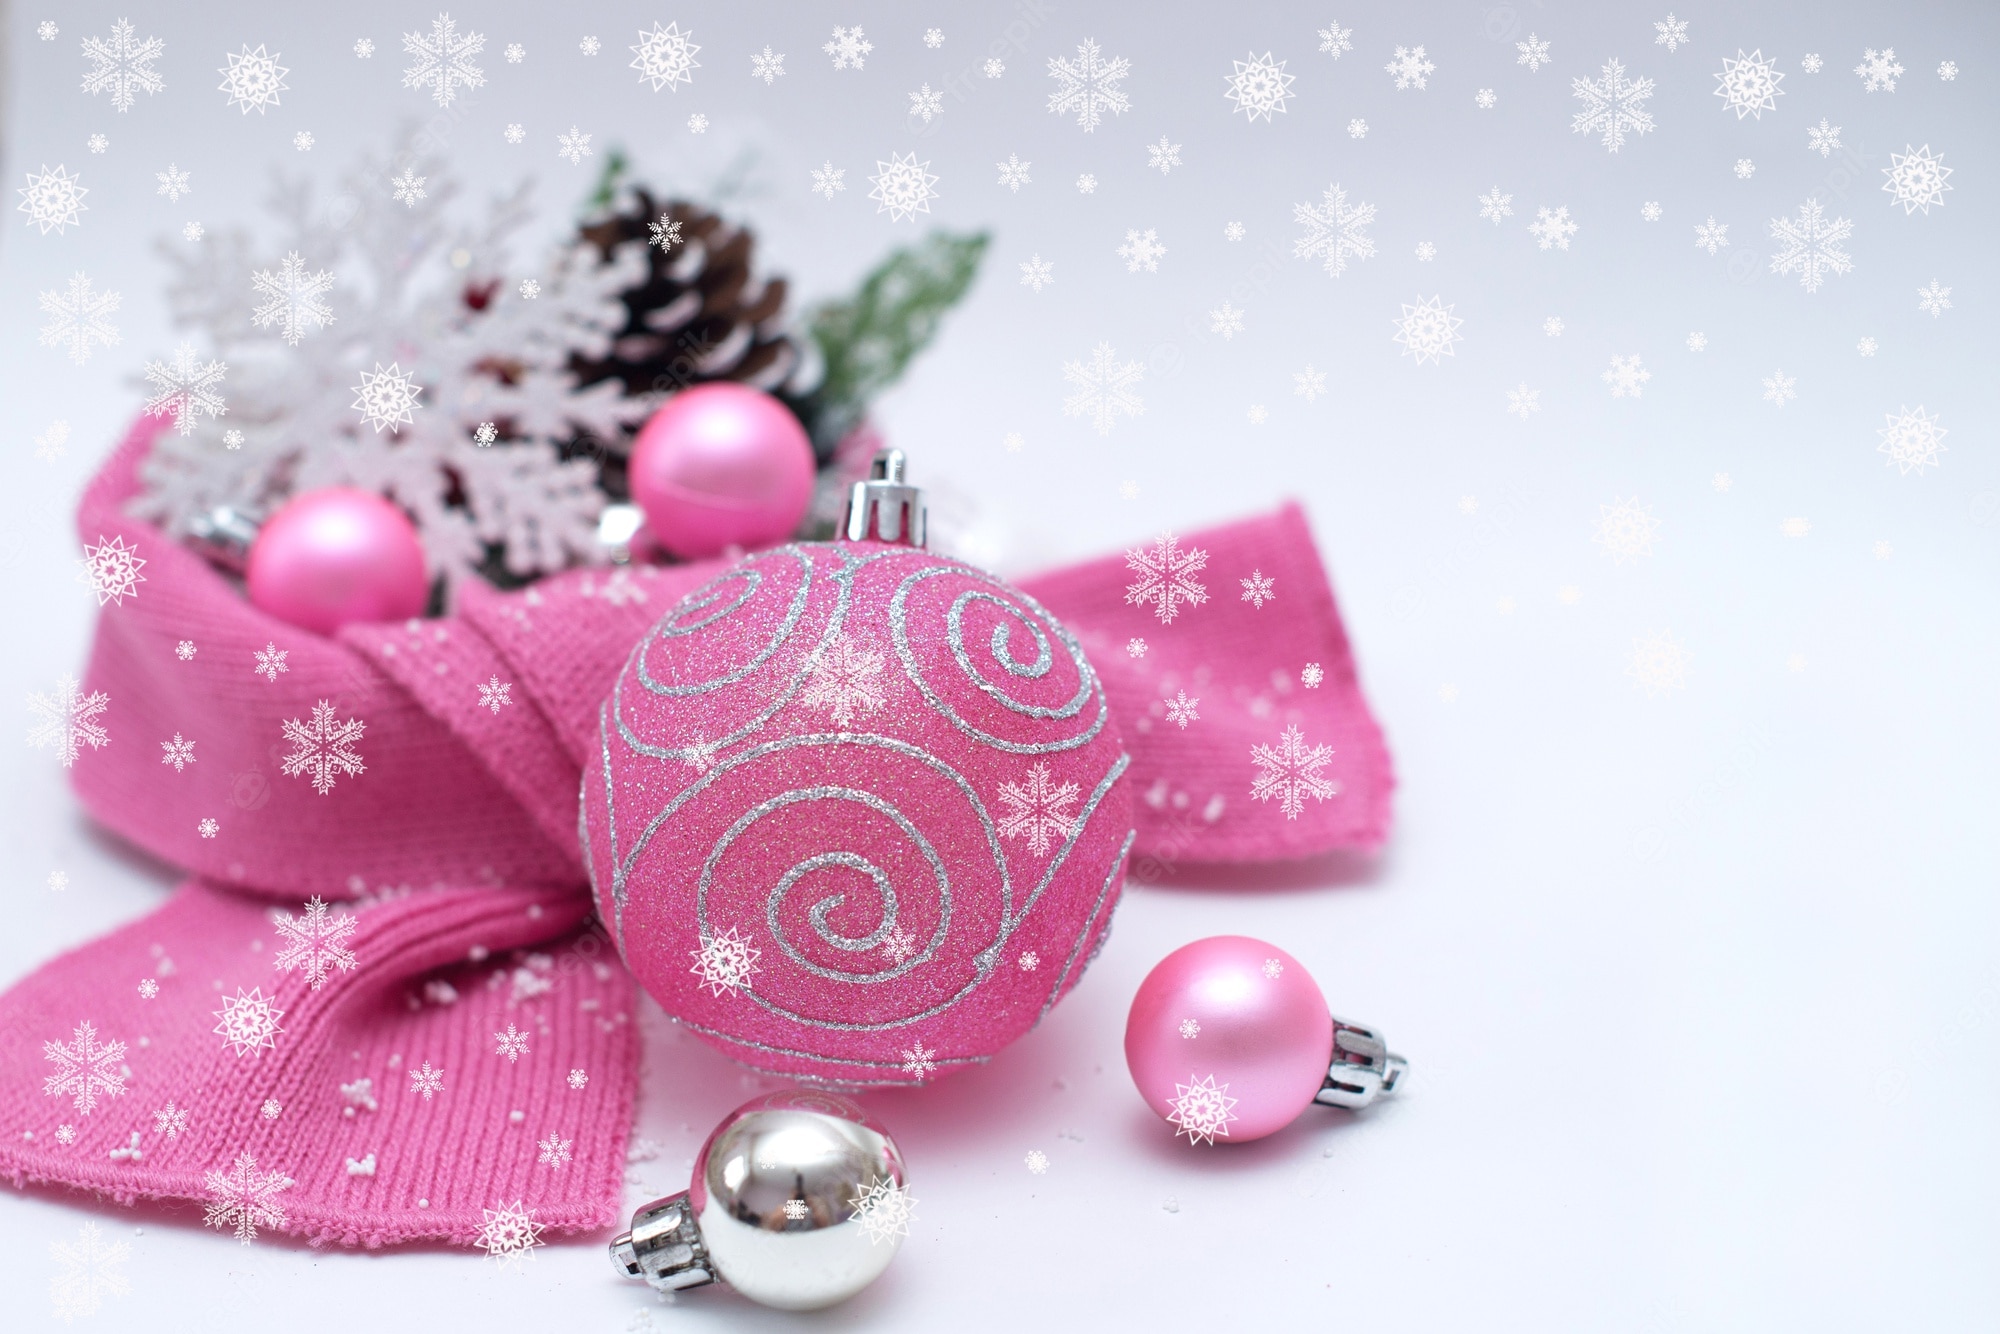 Premium Photo. Christmas background with spruce branches and pink christmas tree toys